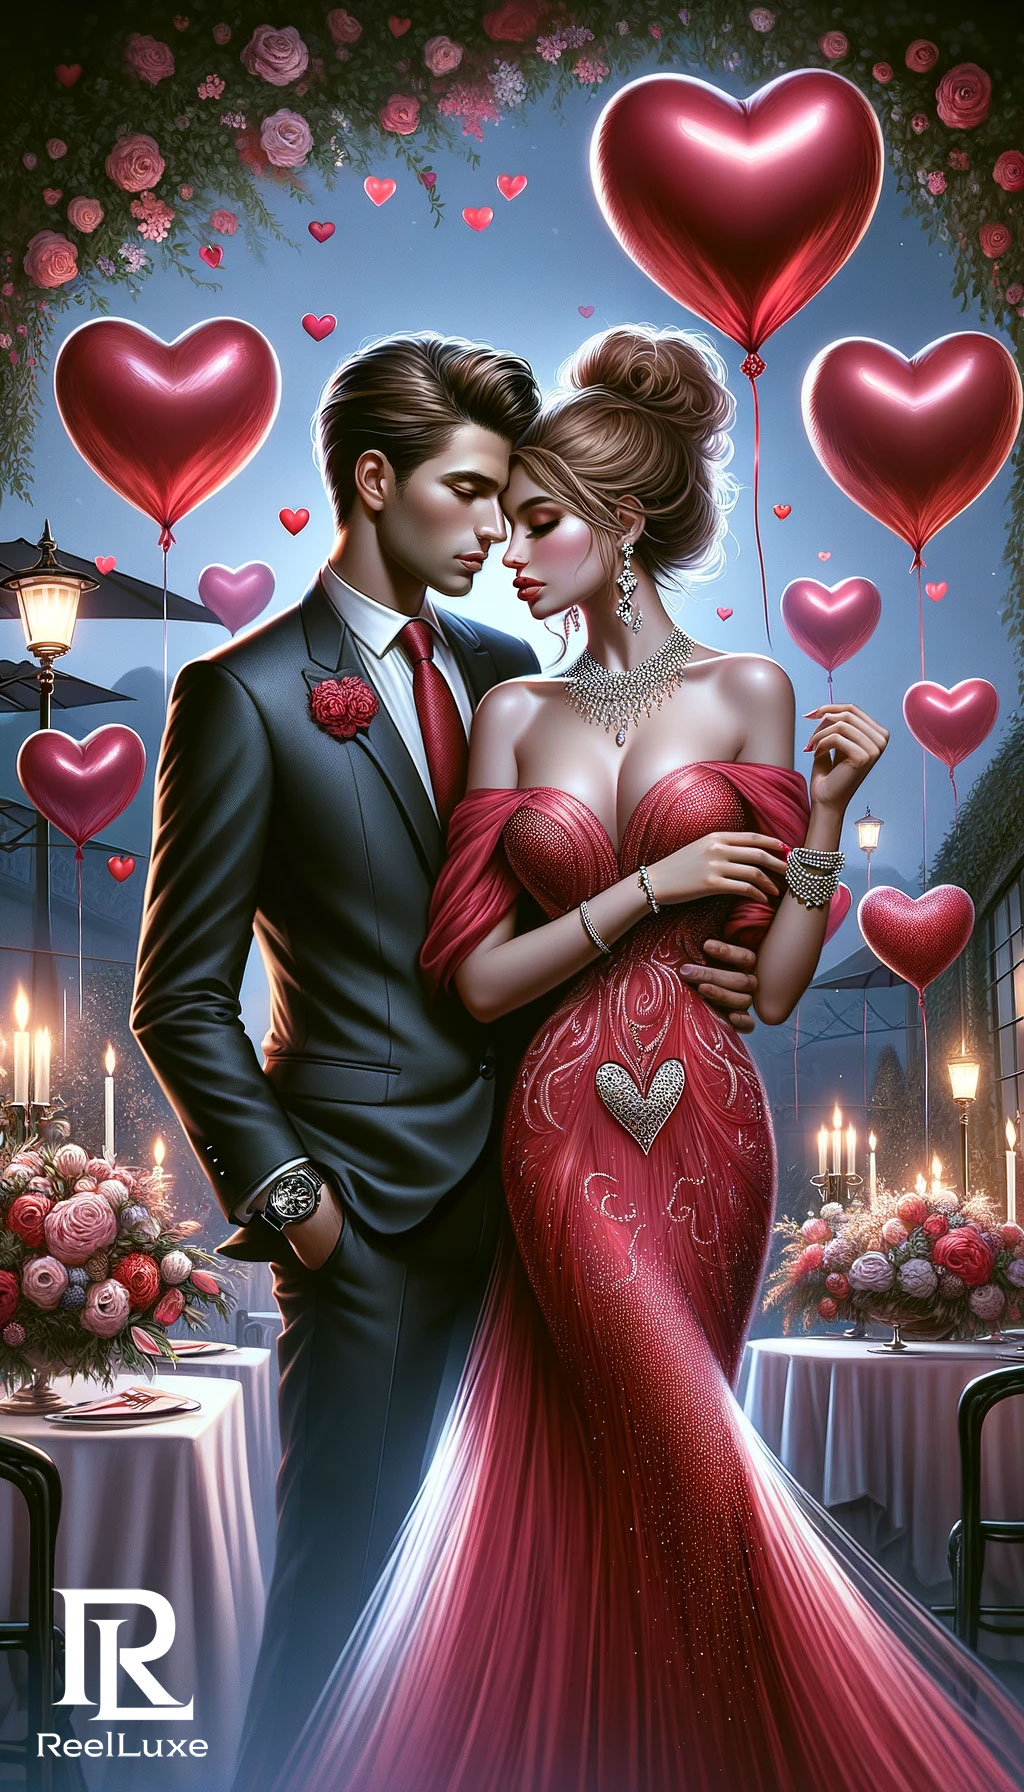 Romance in the Air – Valentine’s Day – Beauty and Fashion – Dinner Date – 3